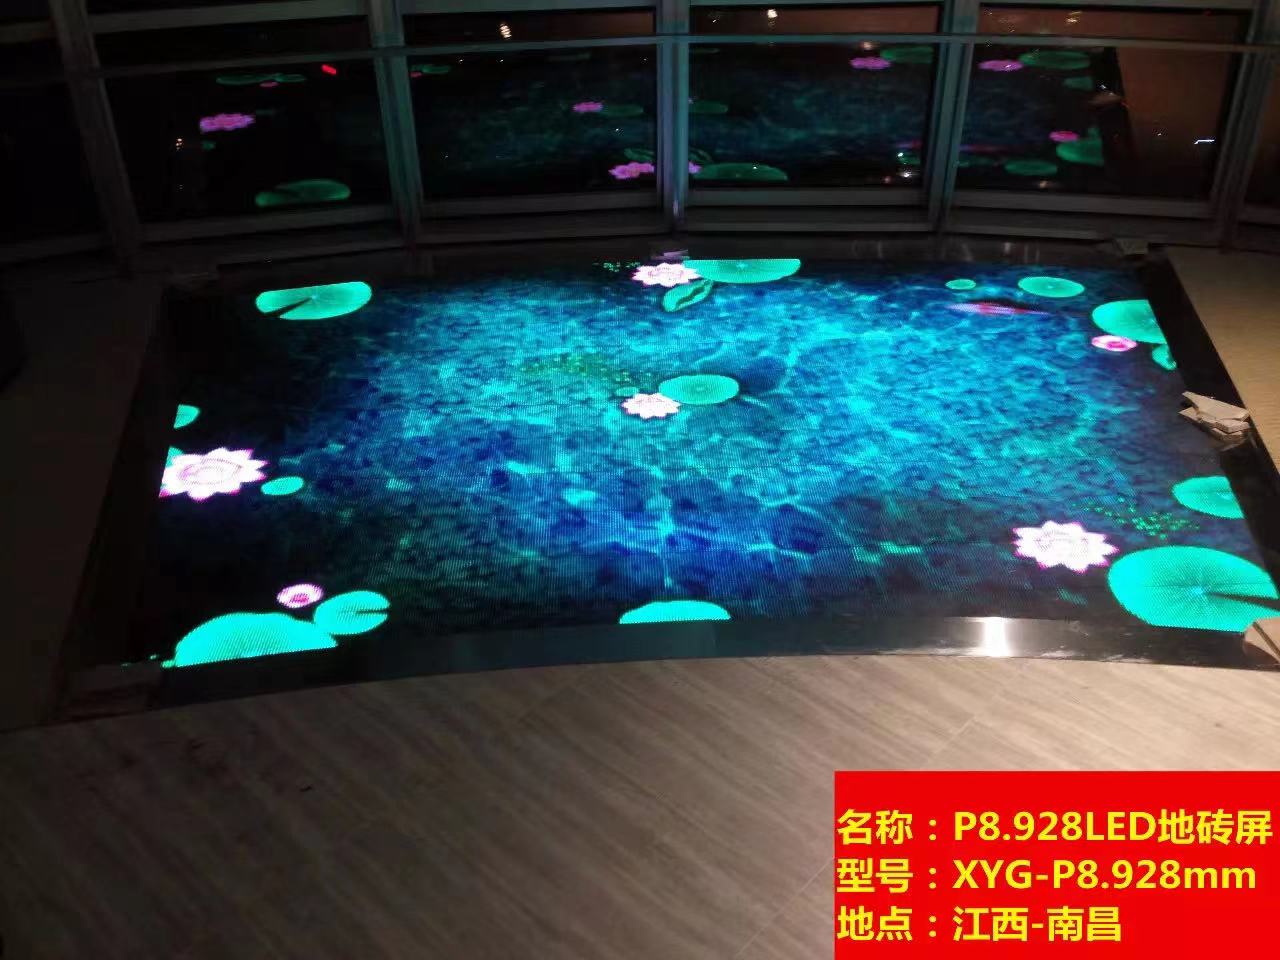 In addition to the stage LED floor screen, there are these unexpected applications